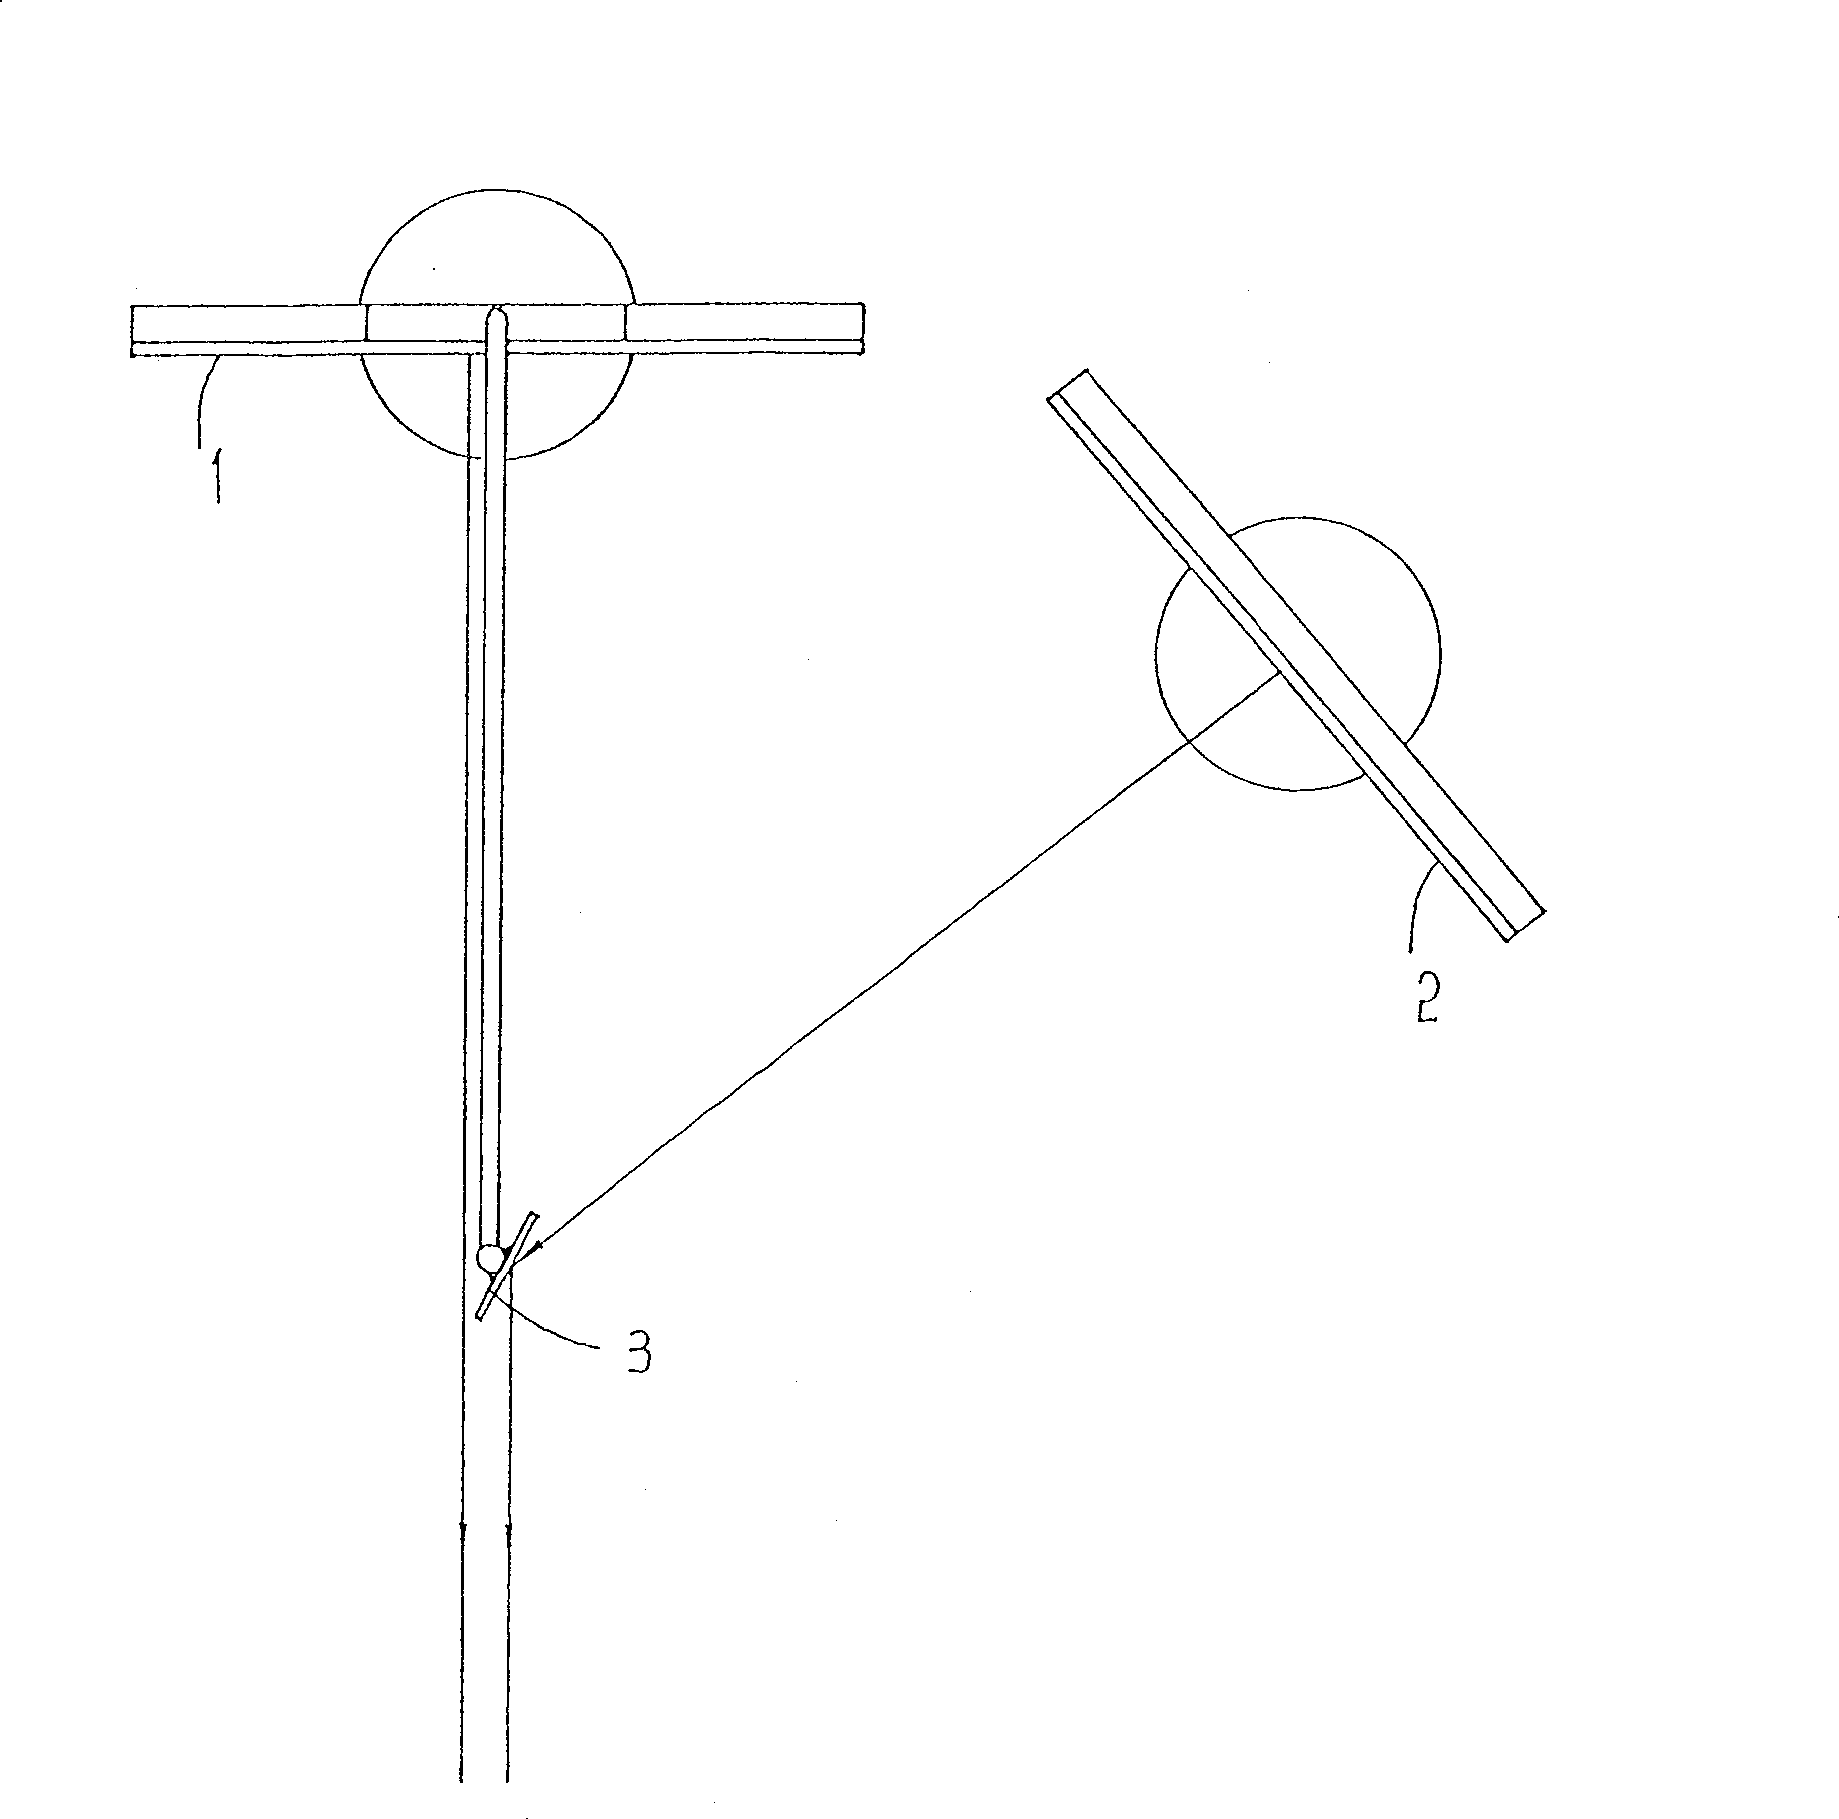 Method of photographing signal treating and broadcasting and viewing stereoimage